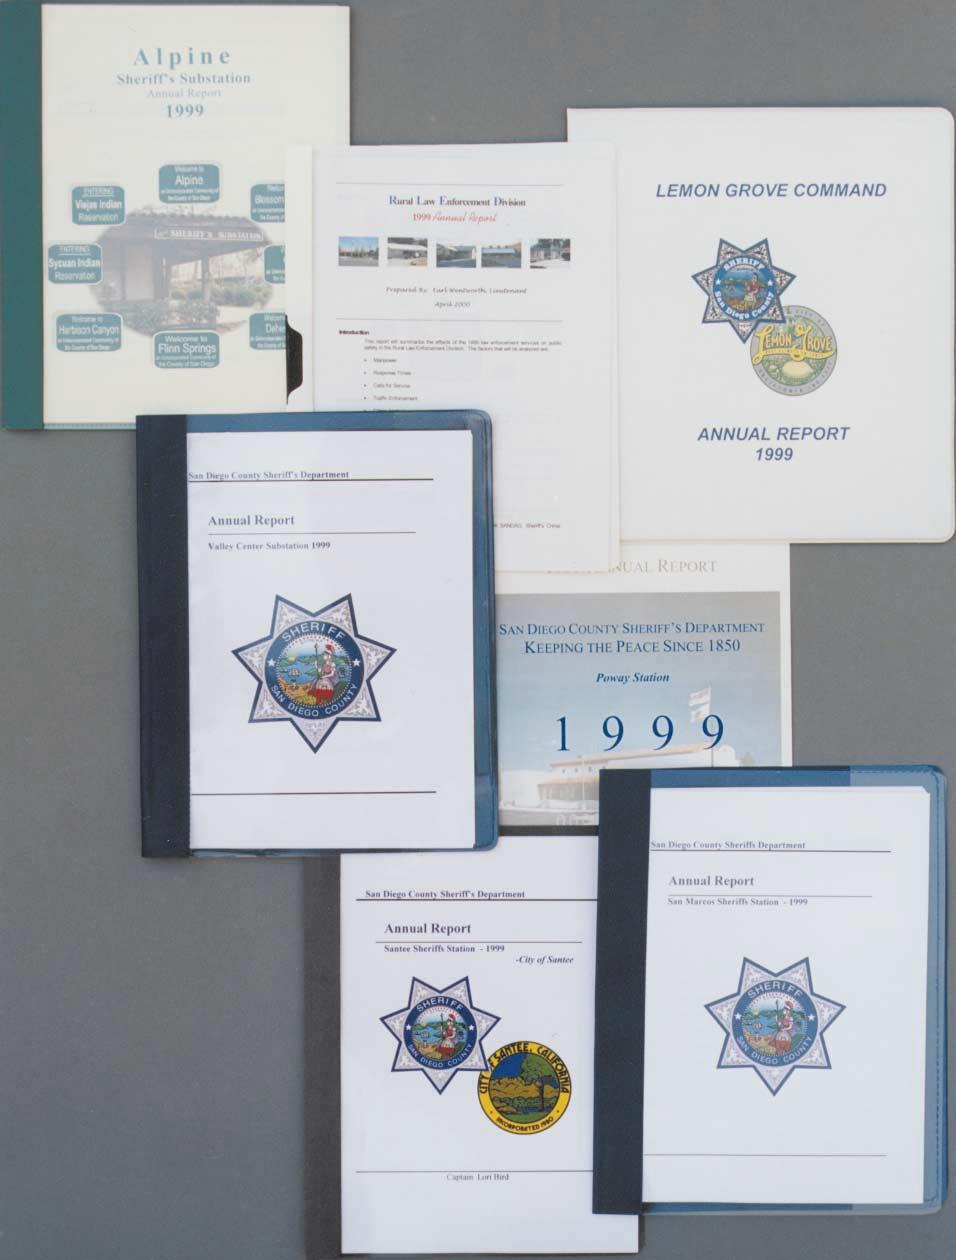 Annual Report 1999 CUSTOMER SERVICE QUALITY IMPROVEMENT PROCESS (CSQIP) I N OUR SECOND FULL YEAR OF THE CSQIP, we took bold steps to shift the framework of past practice and organizational culture.